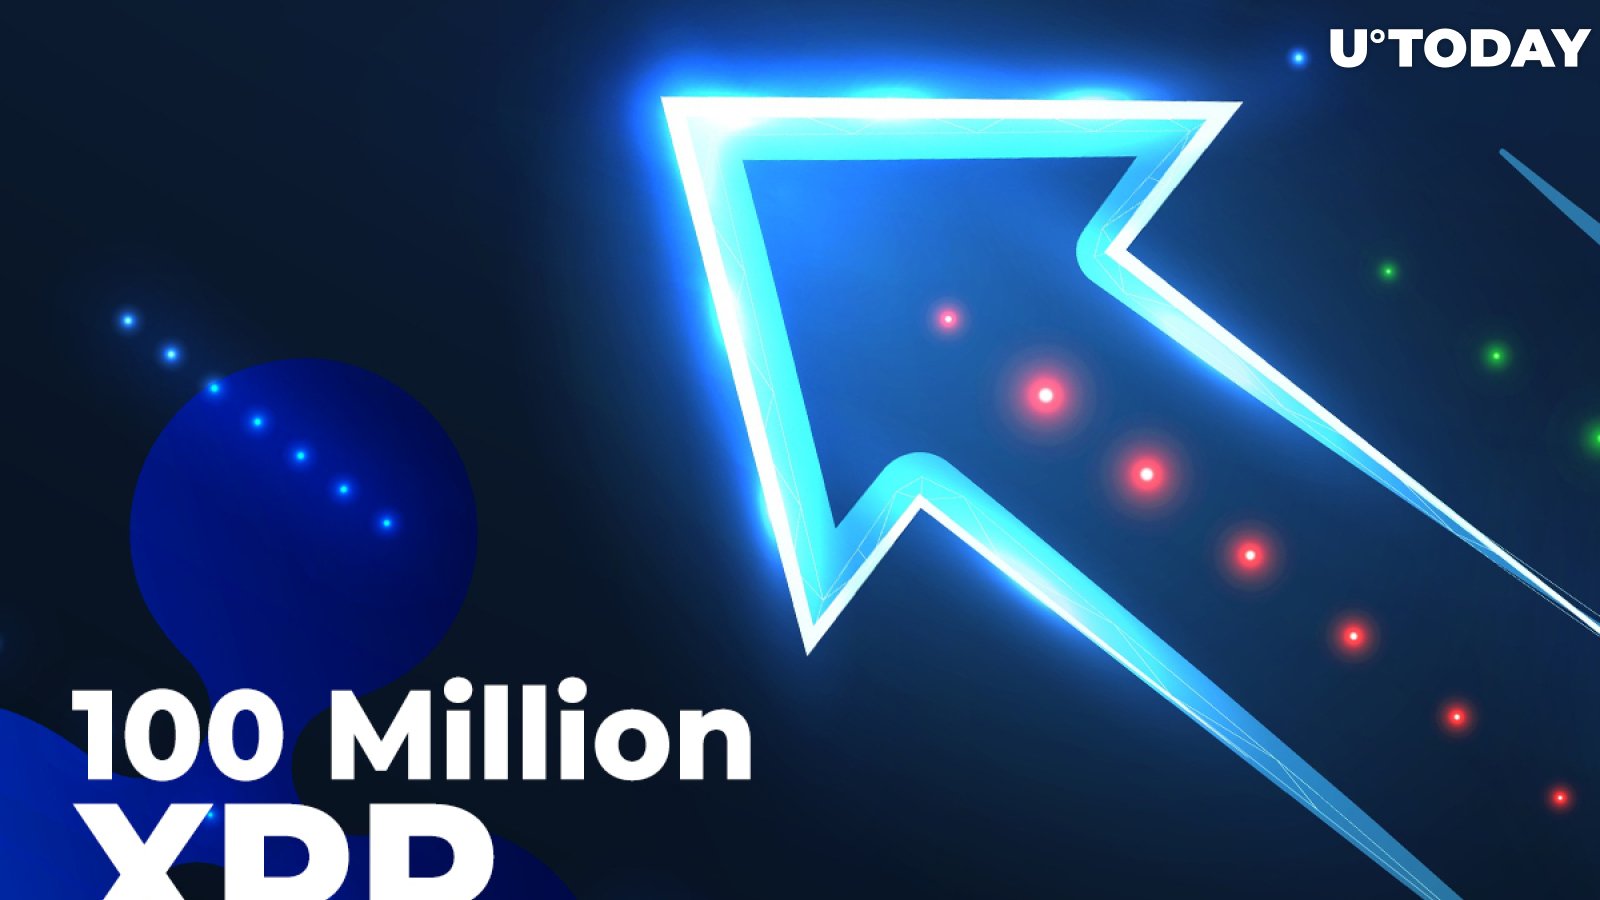 Ripple Allocates 100 Million XRP, Getting Ready to Send It to Huobi in Lumps